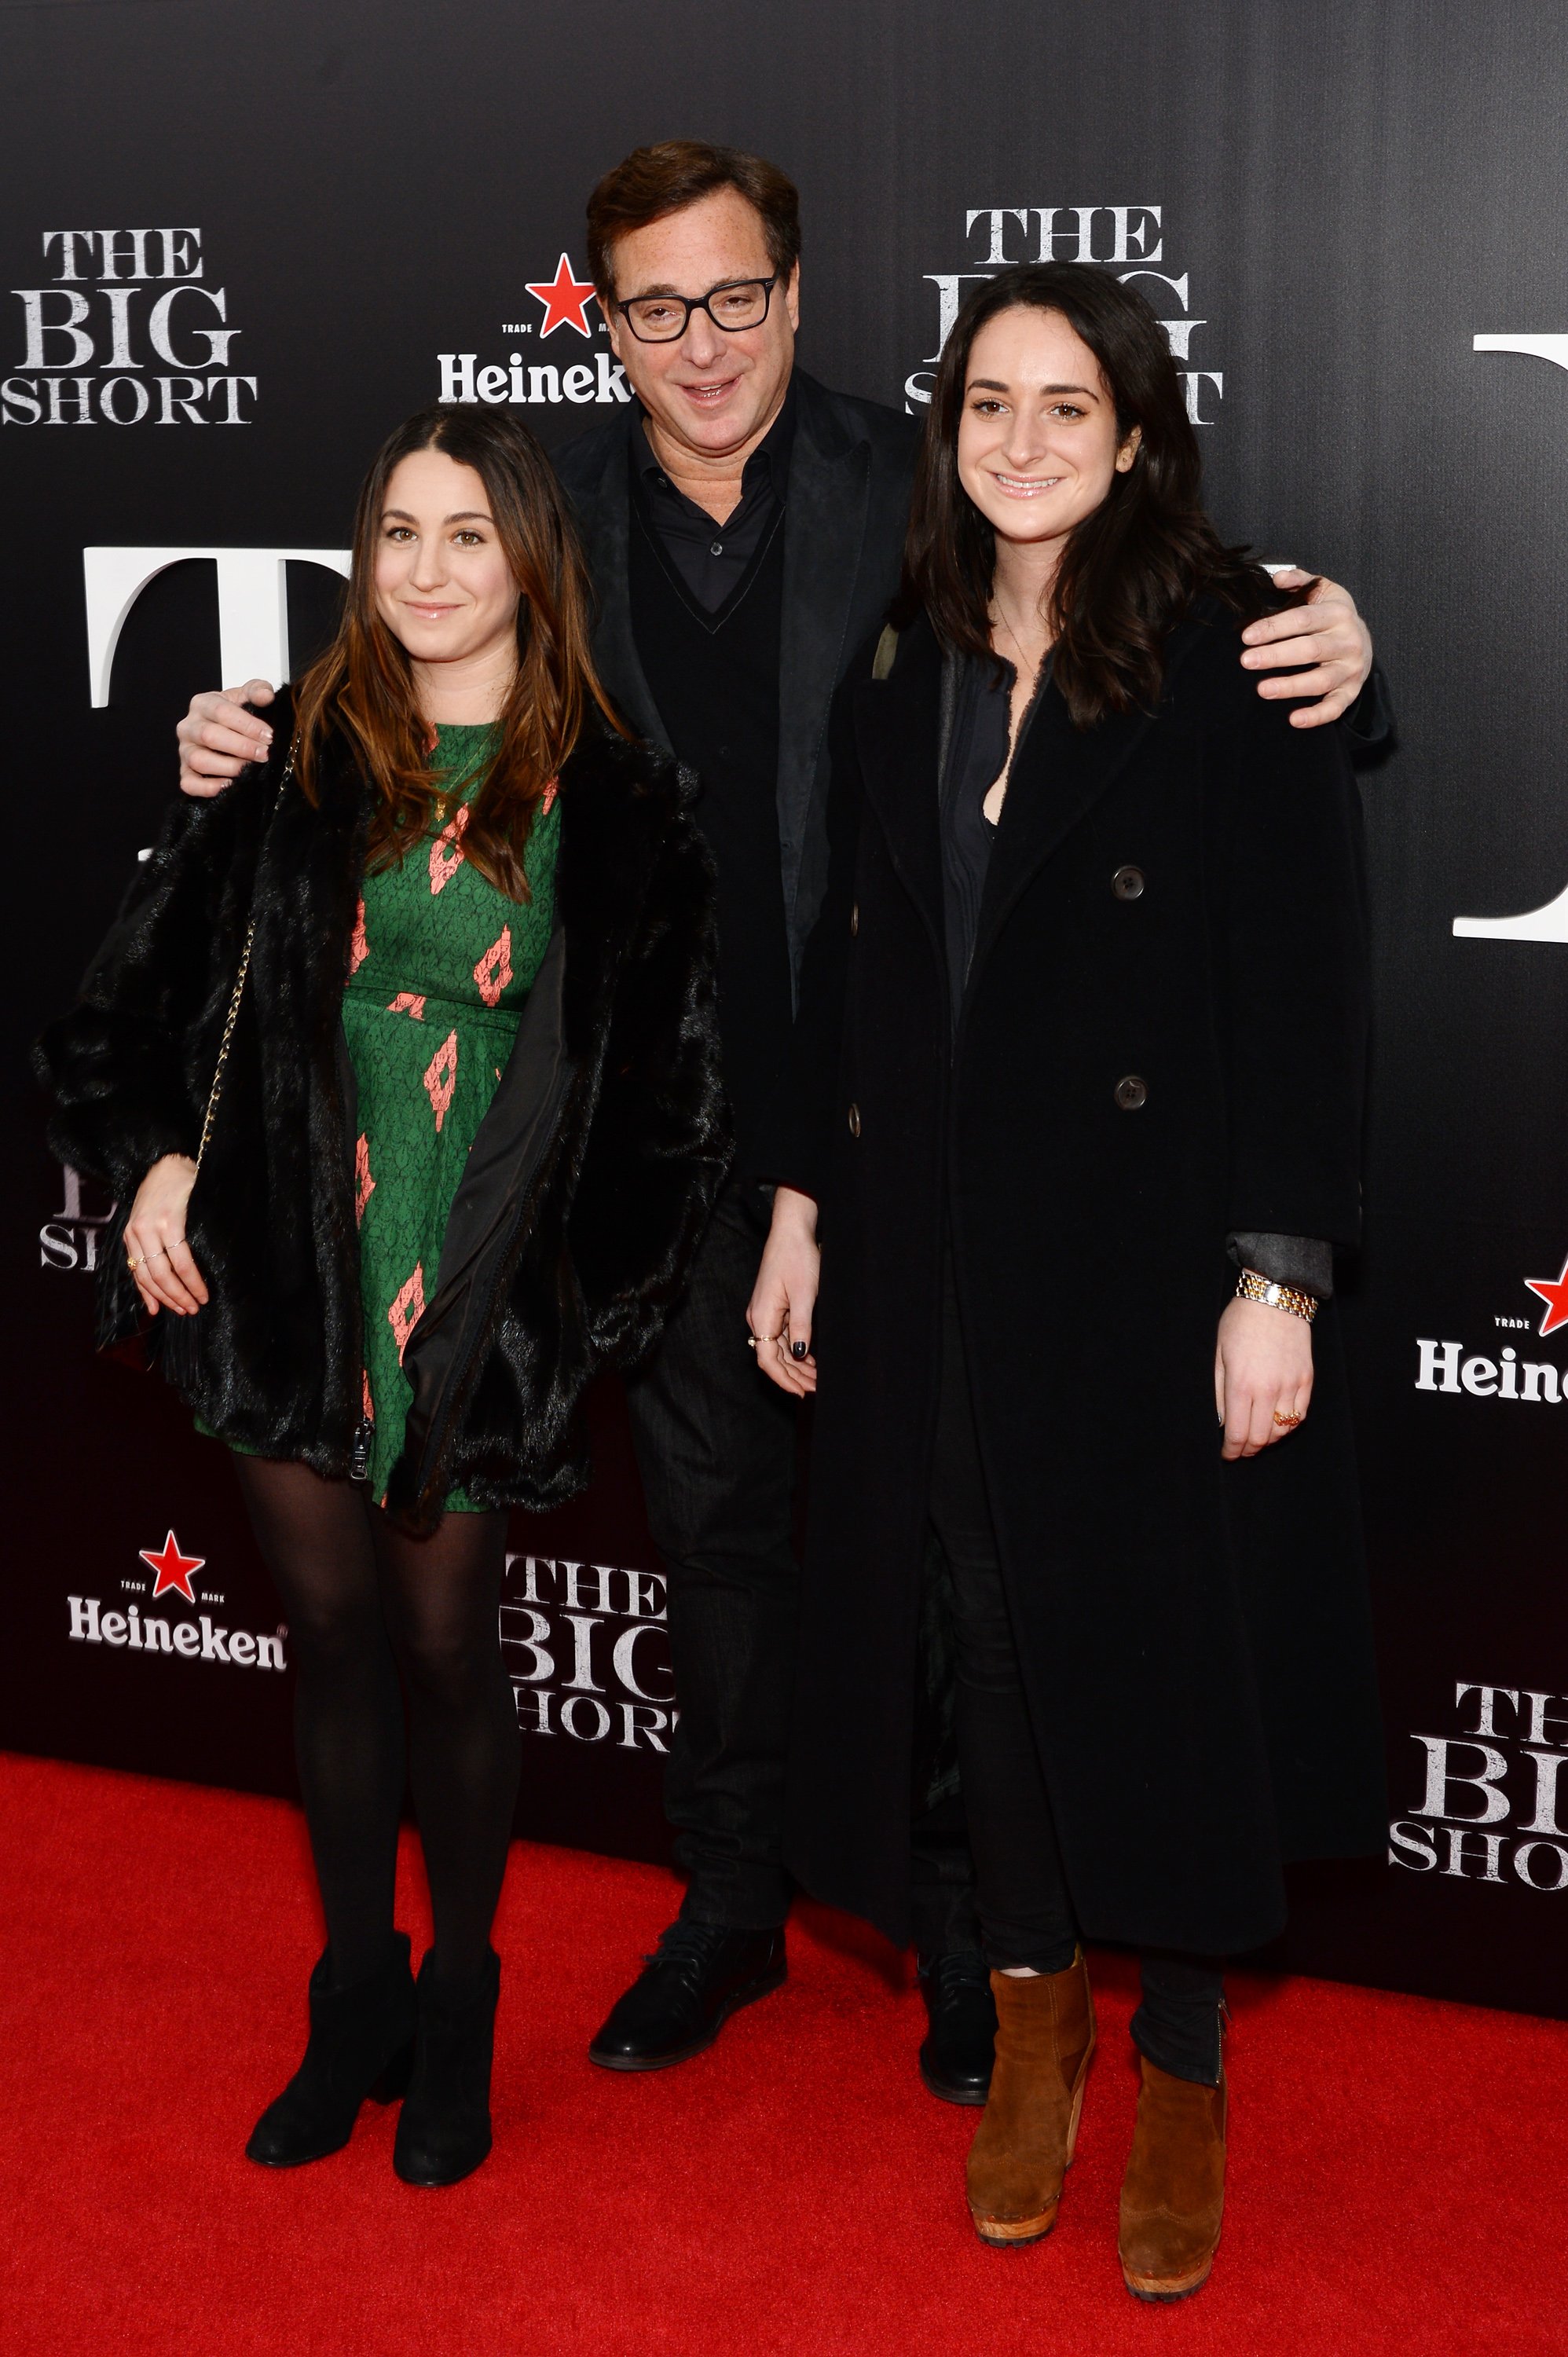 Bob Saget and his daughters attend "The Big Short" New York premiere at Ziegfeld Theater on November 23, 2015, in New York City. | Source: Getty Images